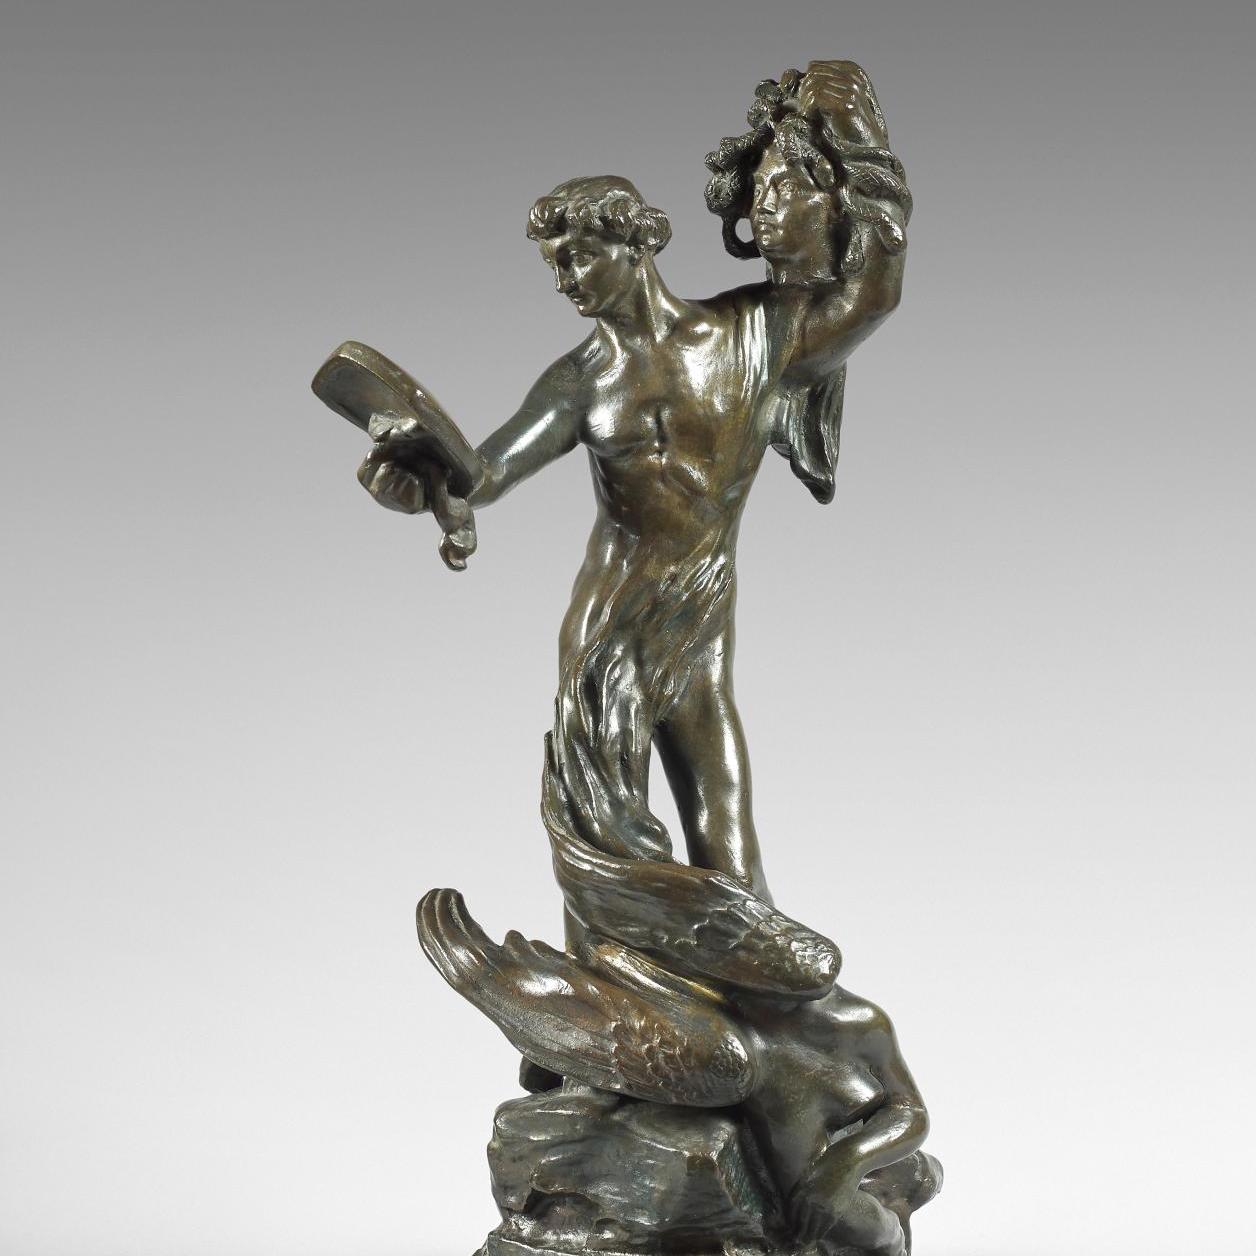 Mythological Scene by Camille Claudel  - Lots sold